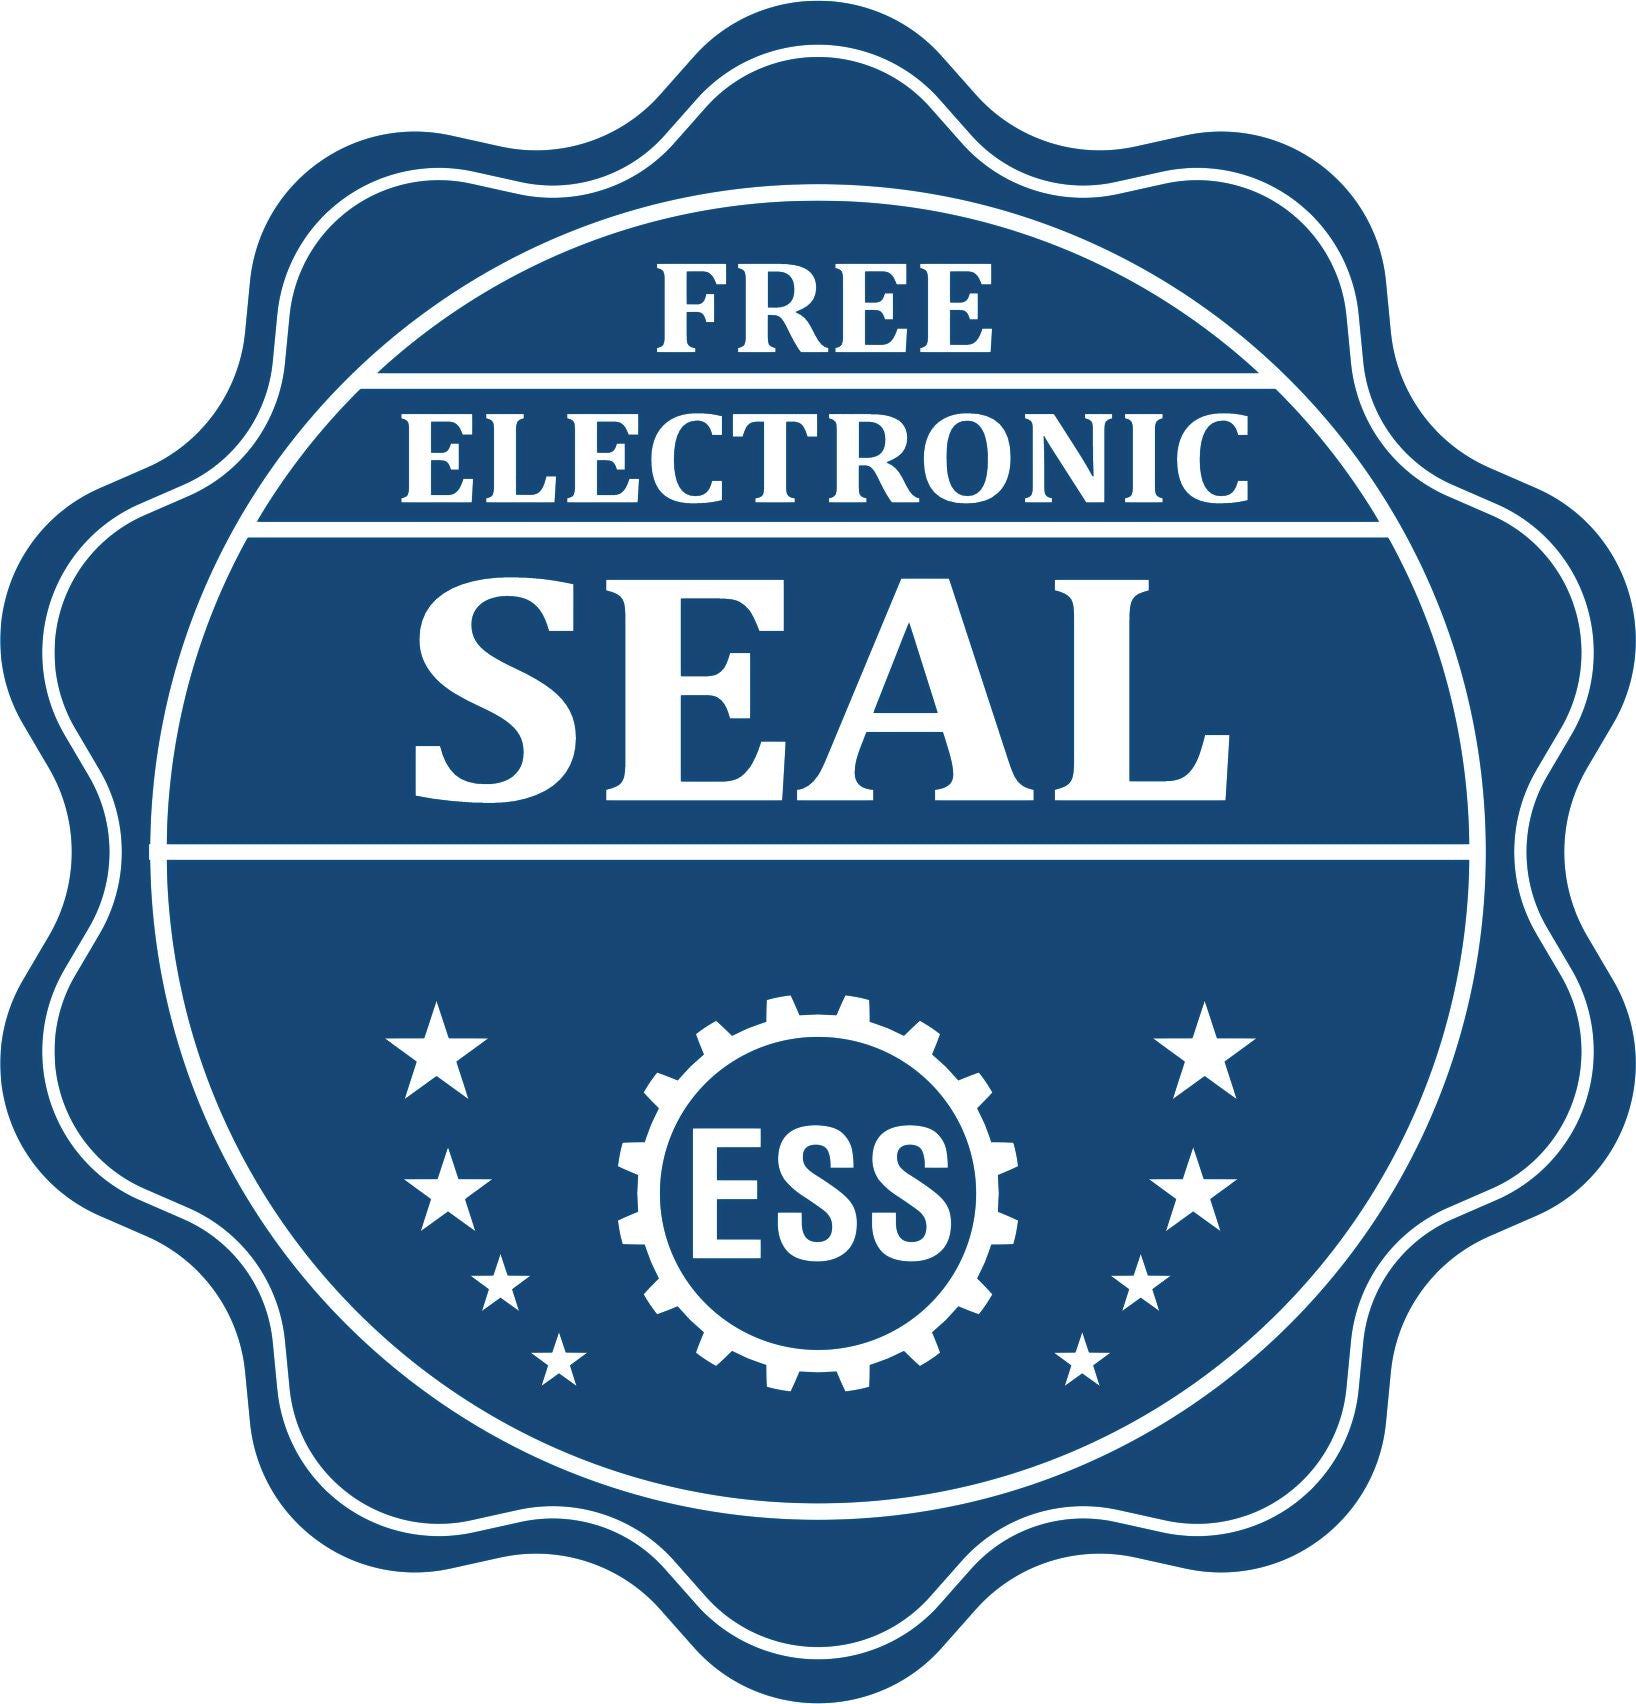 A badge showing a free electronic seal for the Slim Pre-Inked Wyoming Land Surveyor Seal Stamp with stars and the ESS gear on the emblem.